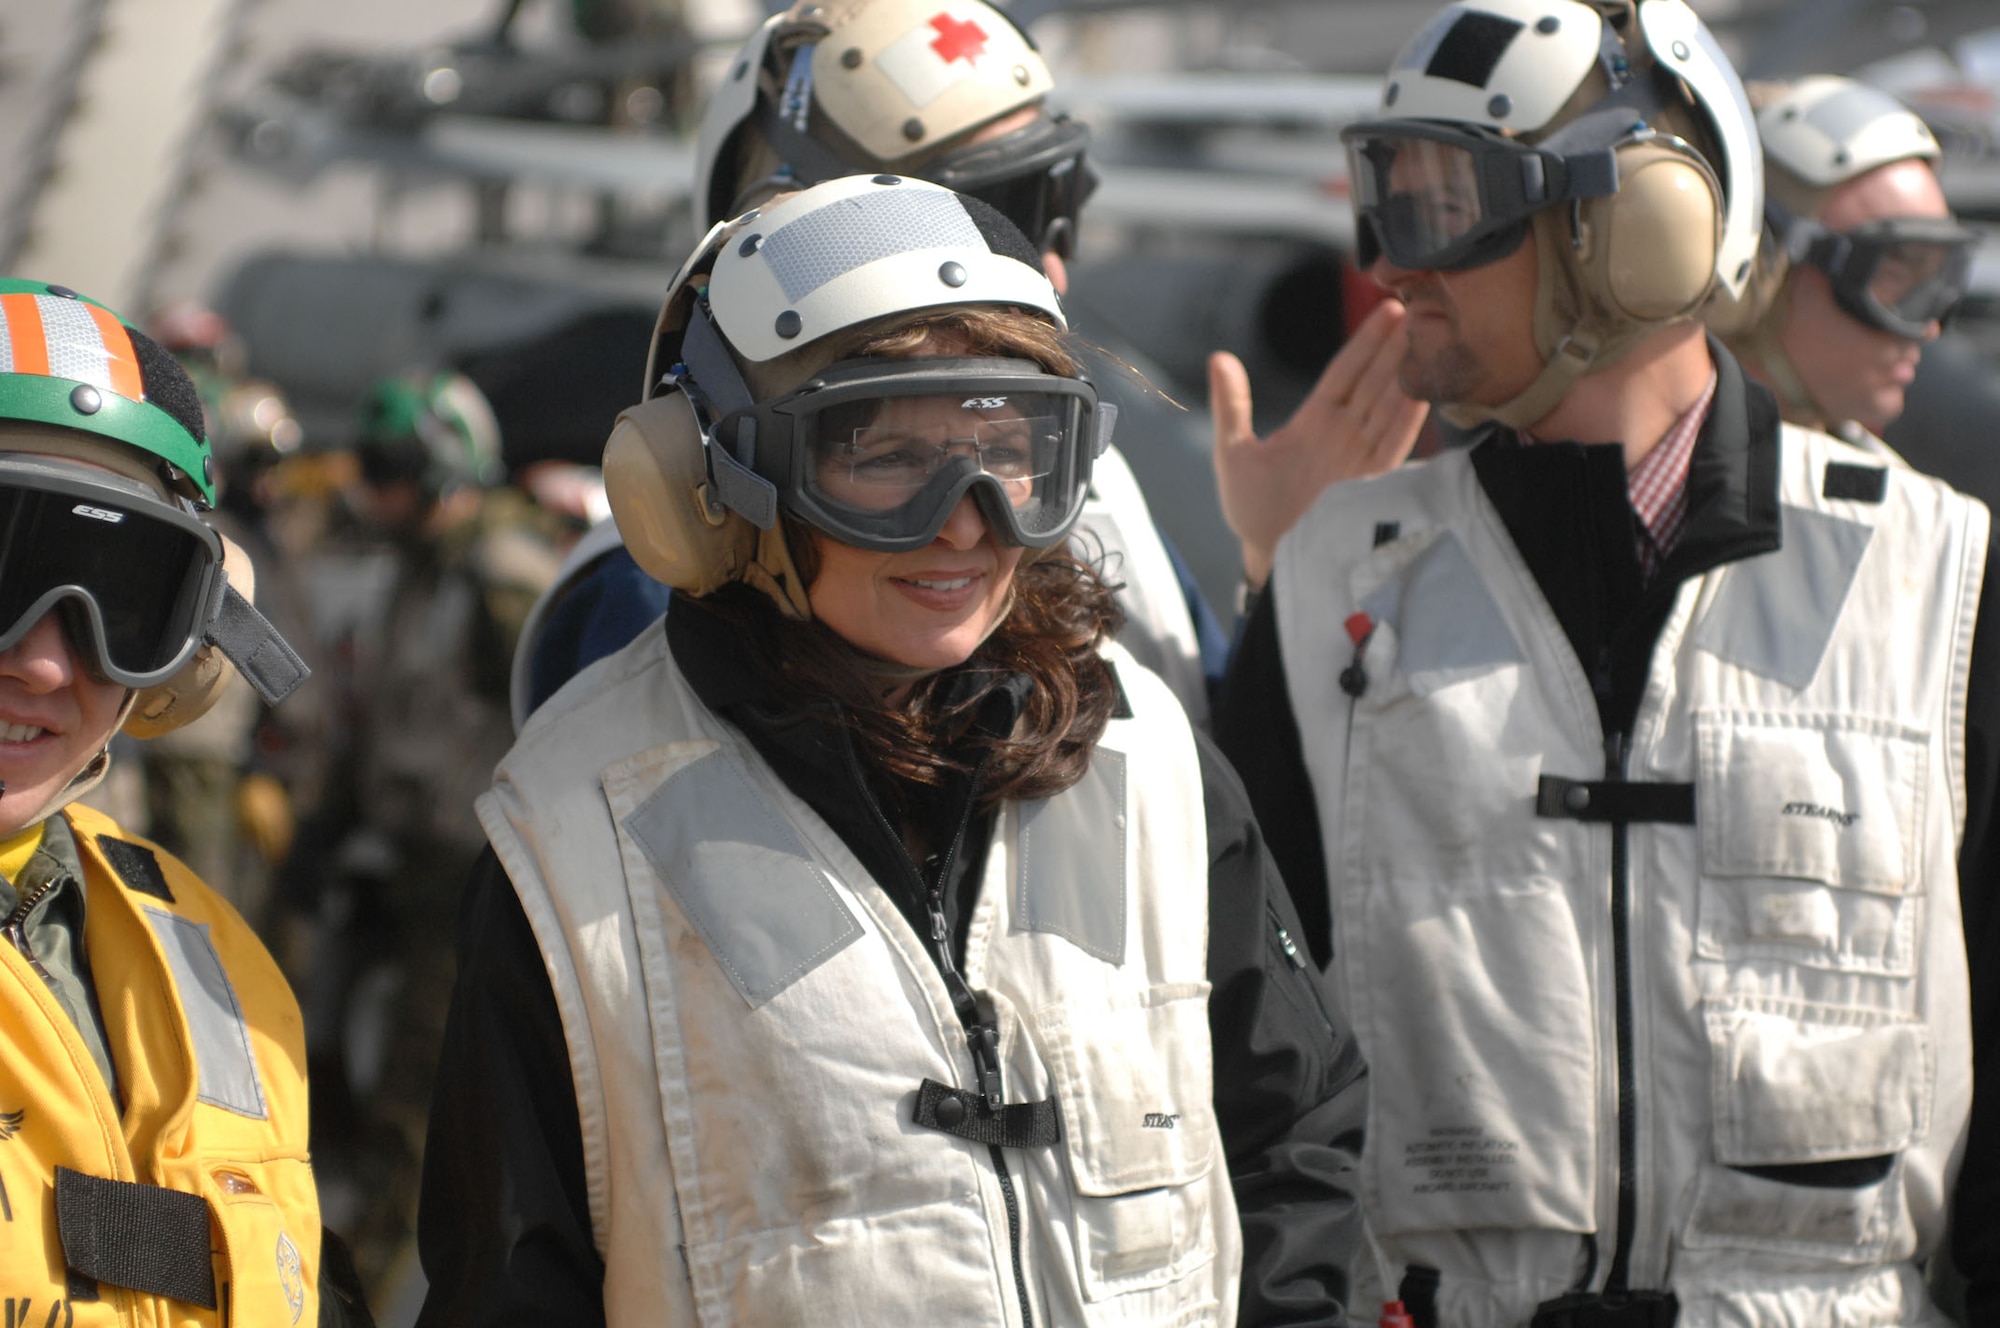 Alaskan Governor Sarah Palin watches flight operations off from the deck of the aircraft carrier USS John C. Stennis (CVN 74) on Monday during the military joint-training exercise Northern Edge 2009 (Photo by Army Sgt. Ricardo Branch, Northern Edge Joint Information Bureau).